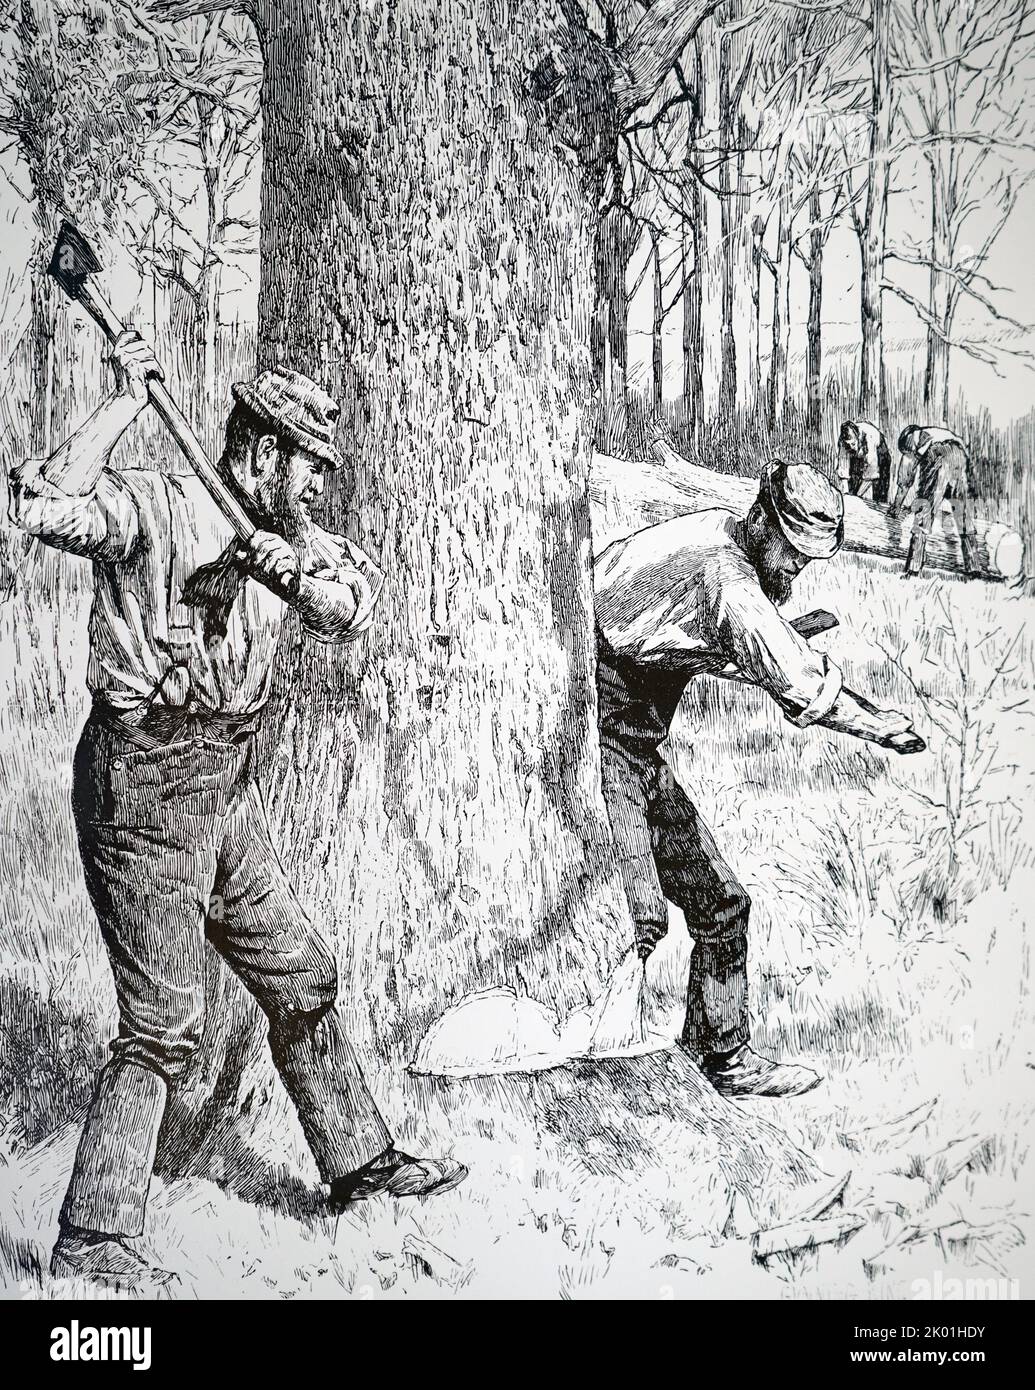 Oak trees being felled for the bark harvest (Kent and Surrey). Bark was stripped from the branches and trunk, mixed with copperas (ferrous sulphate) and used as a black textile dye. It was also used for tanning leather. Illustration by Gunning King (1859-1940). From the Illustrated London News, 29 May, 1886. Stock Photo